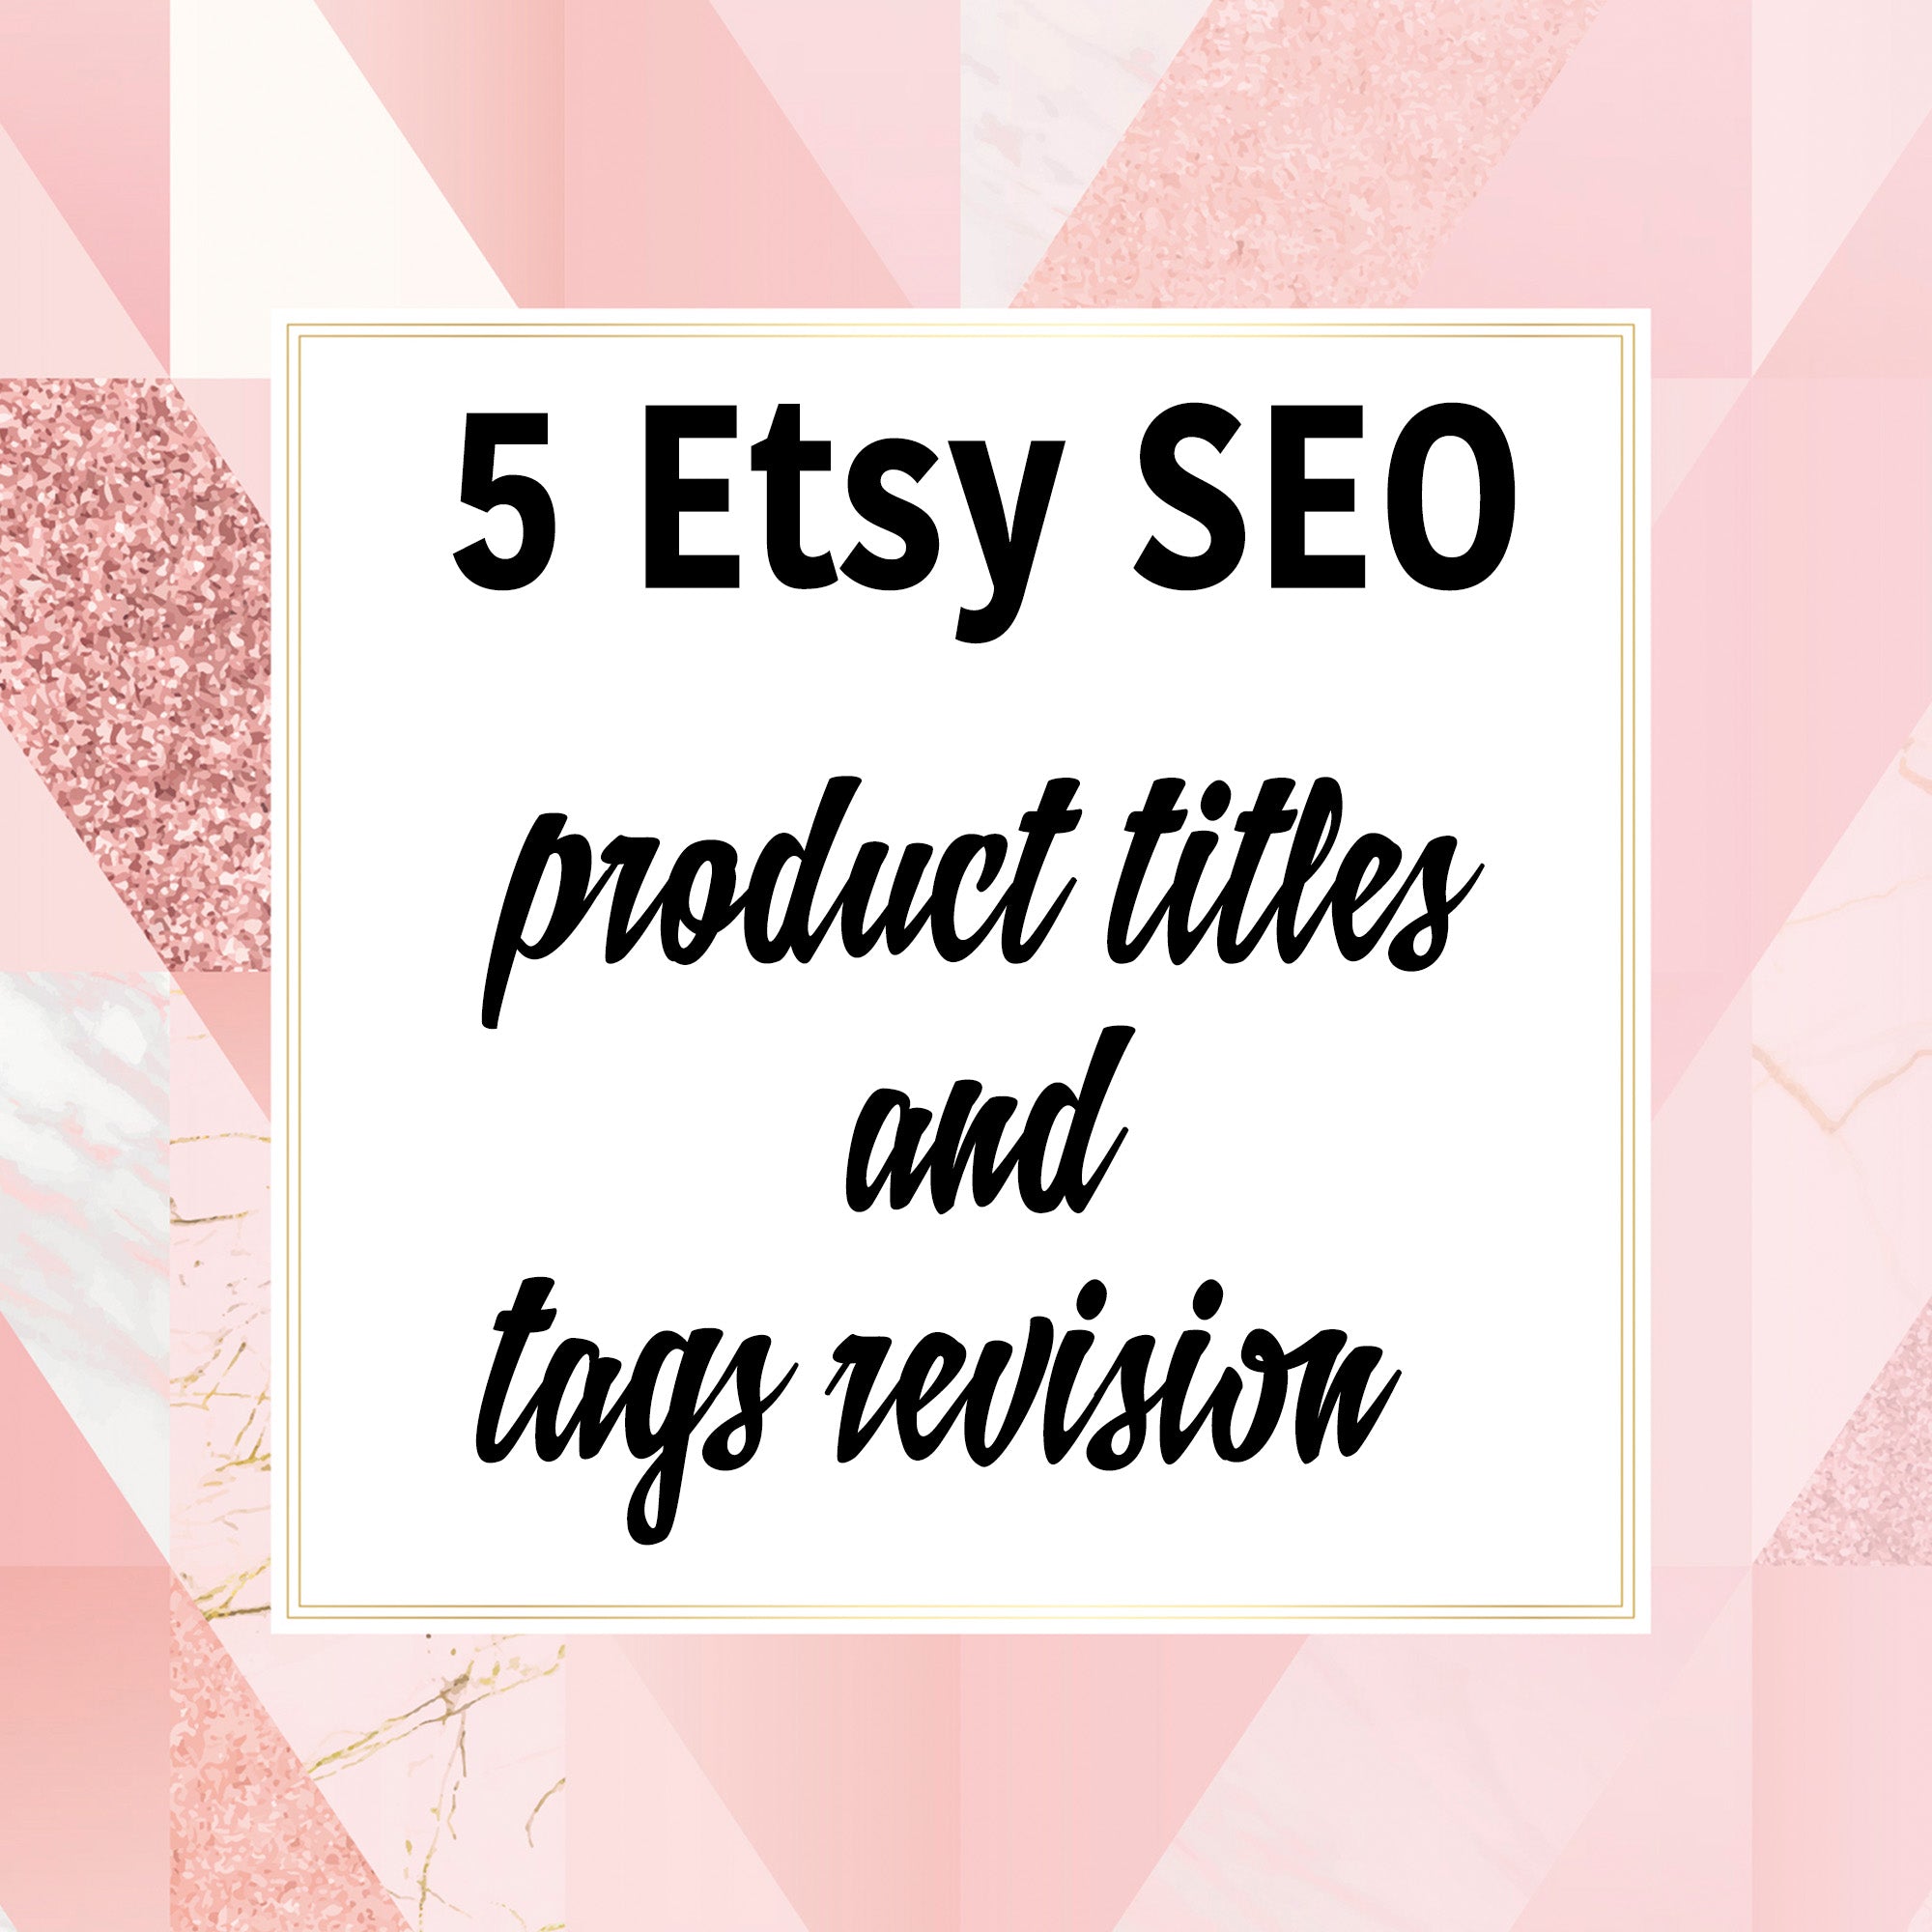 Product SEO & title for etsy products